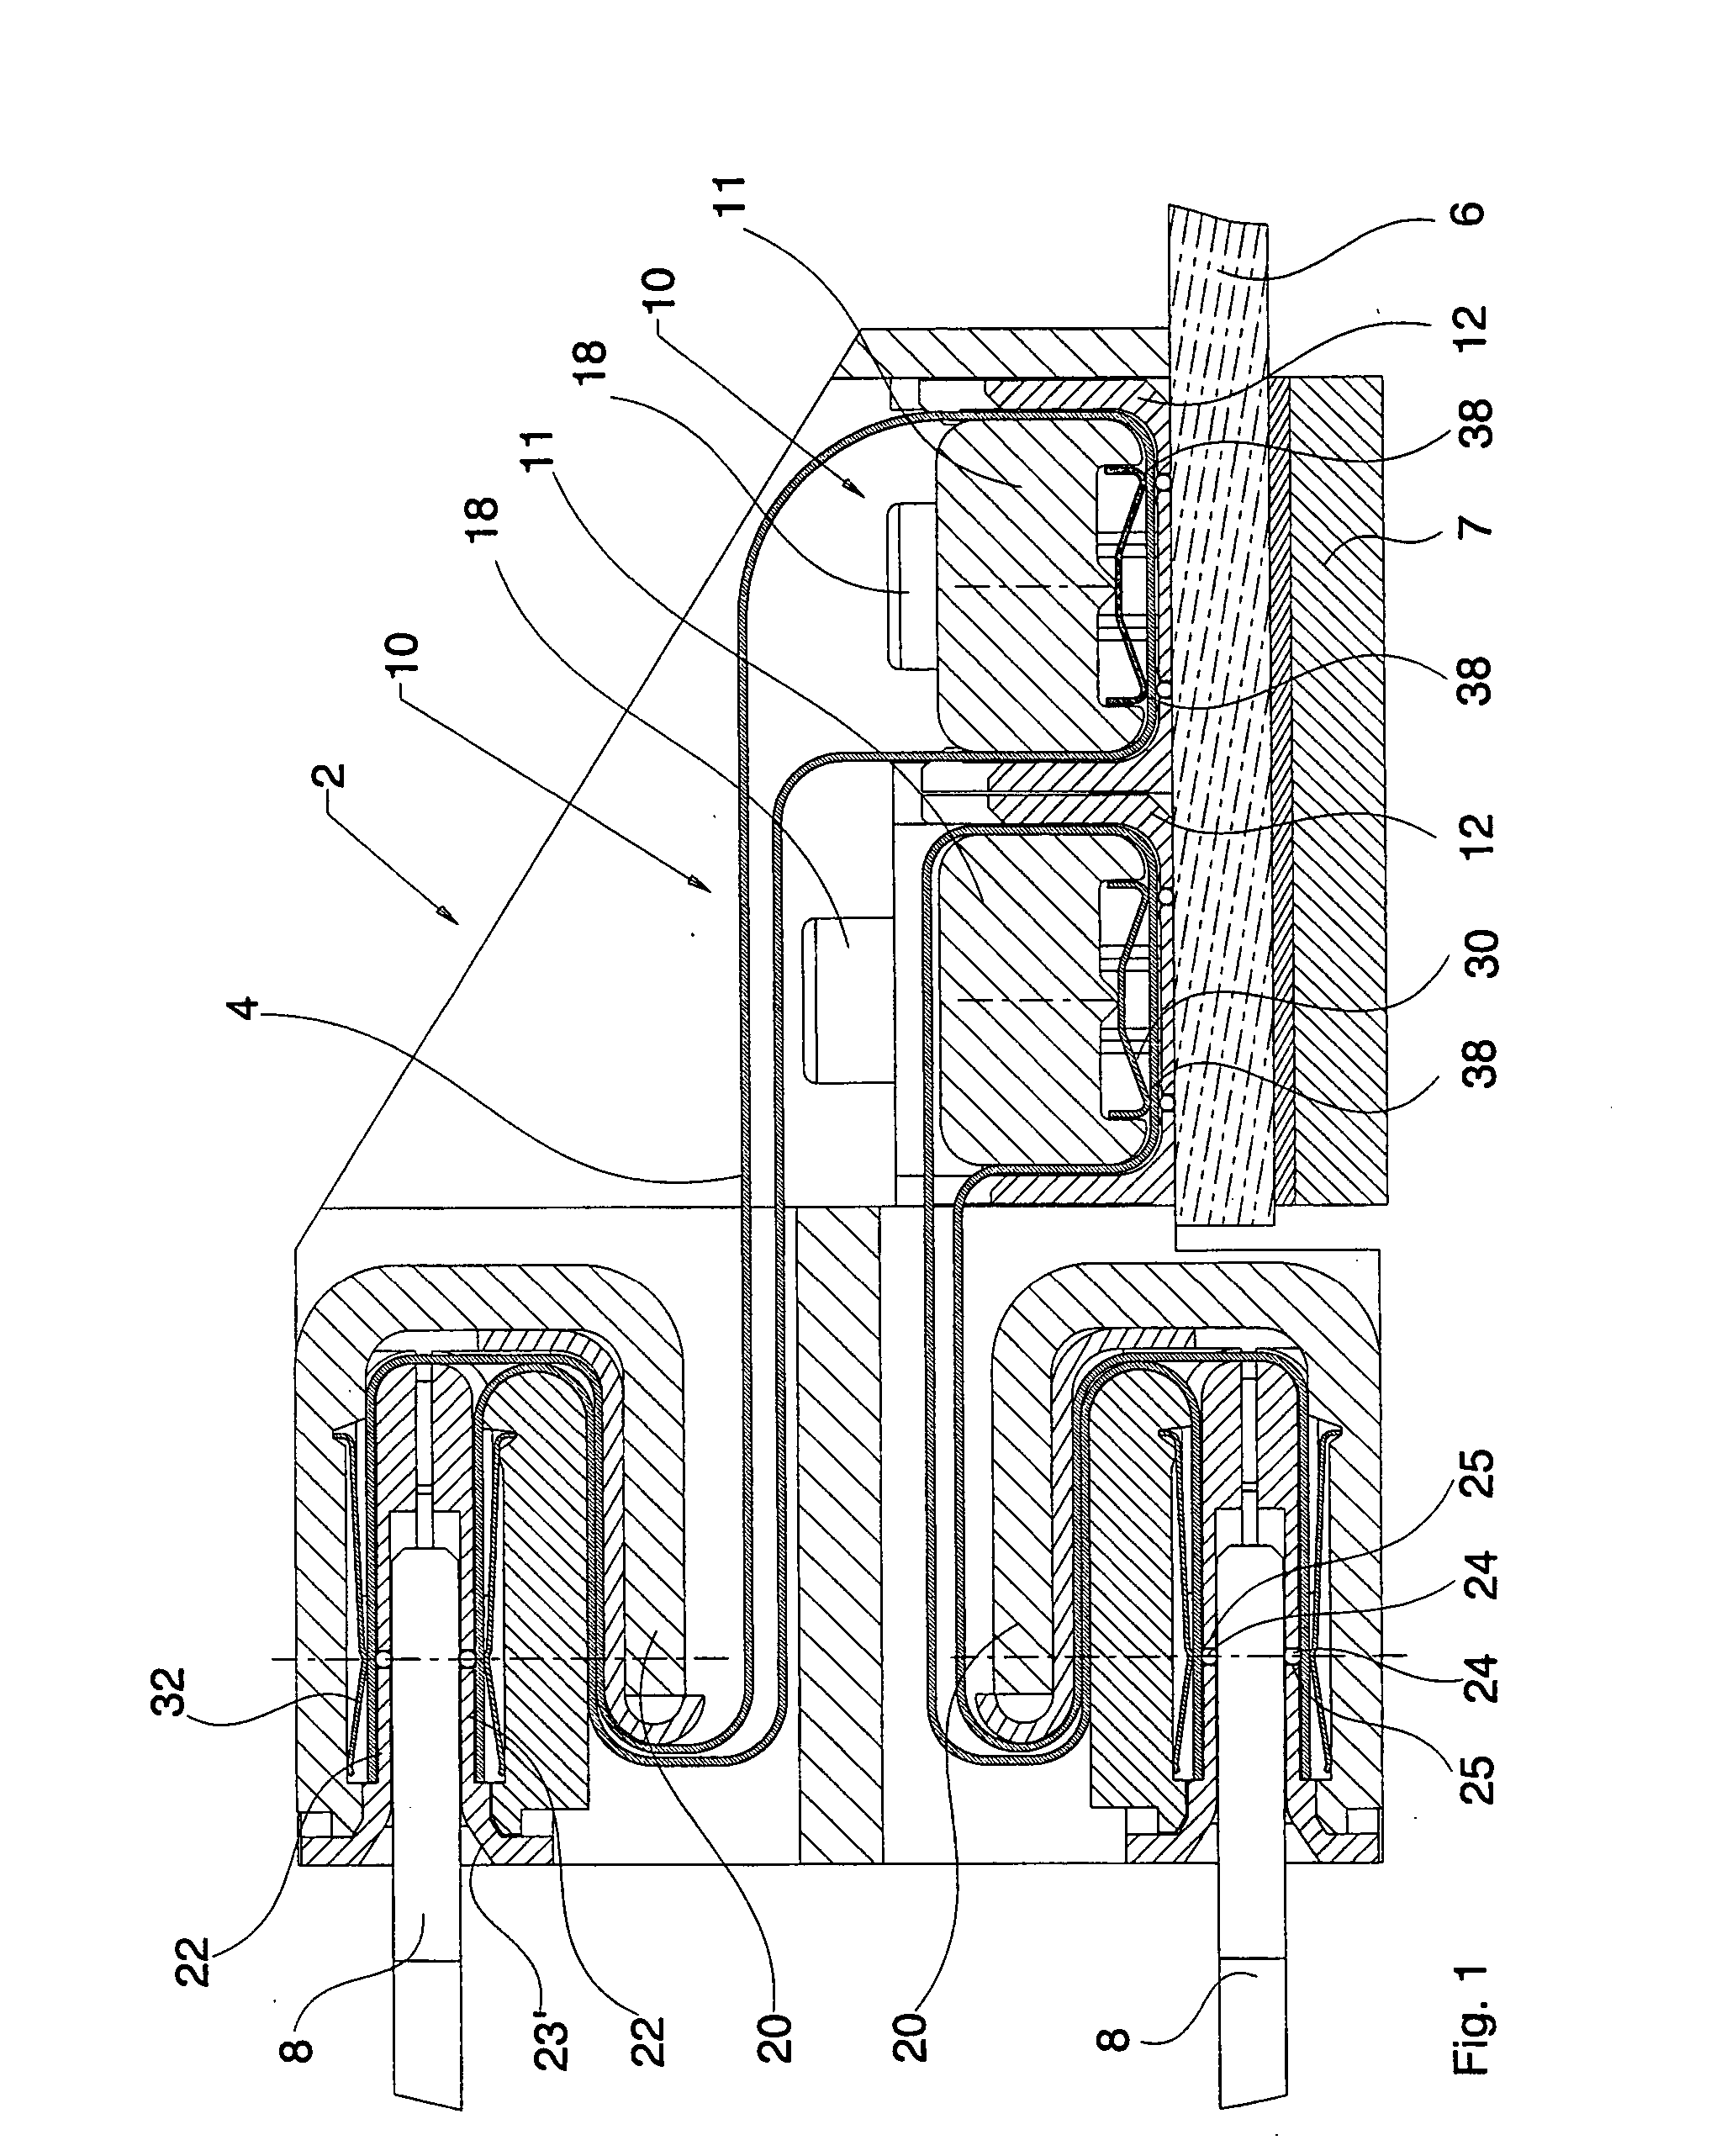 Connector for connecting printed circuit boards